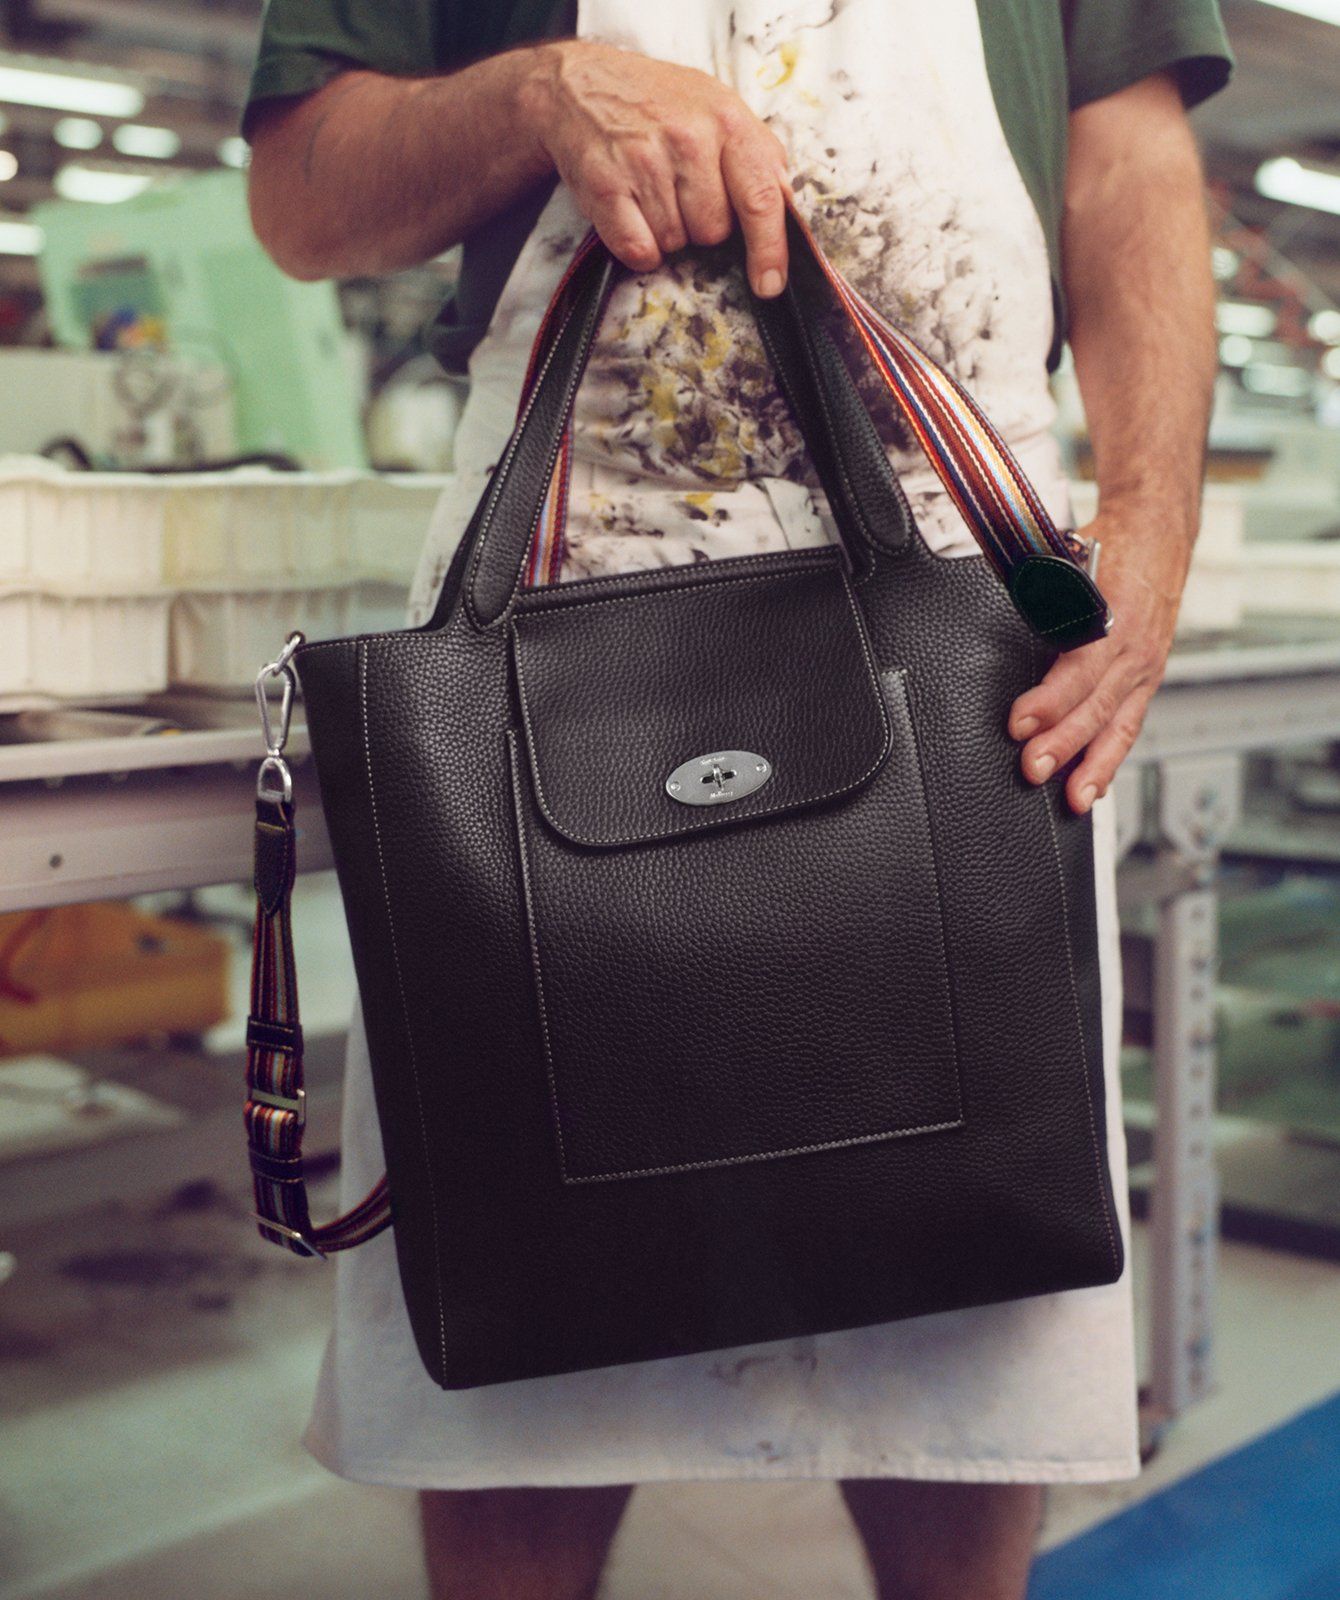 mulberry worker holding mulberry paul smith antony tote bag in black